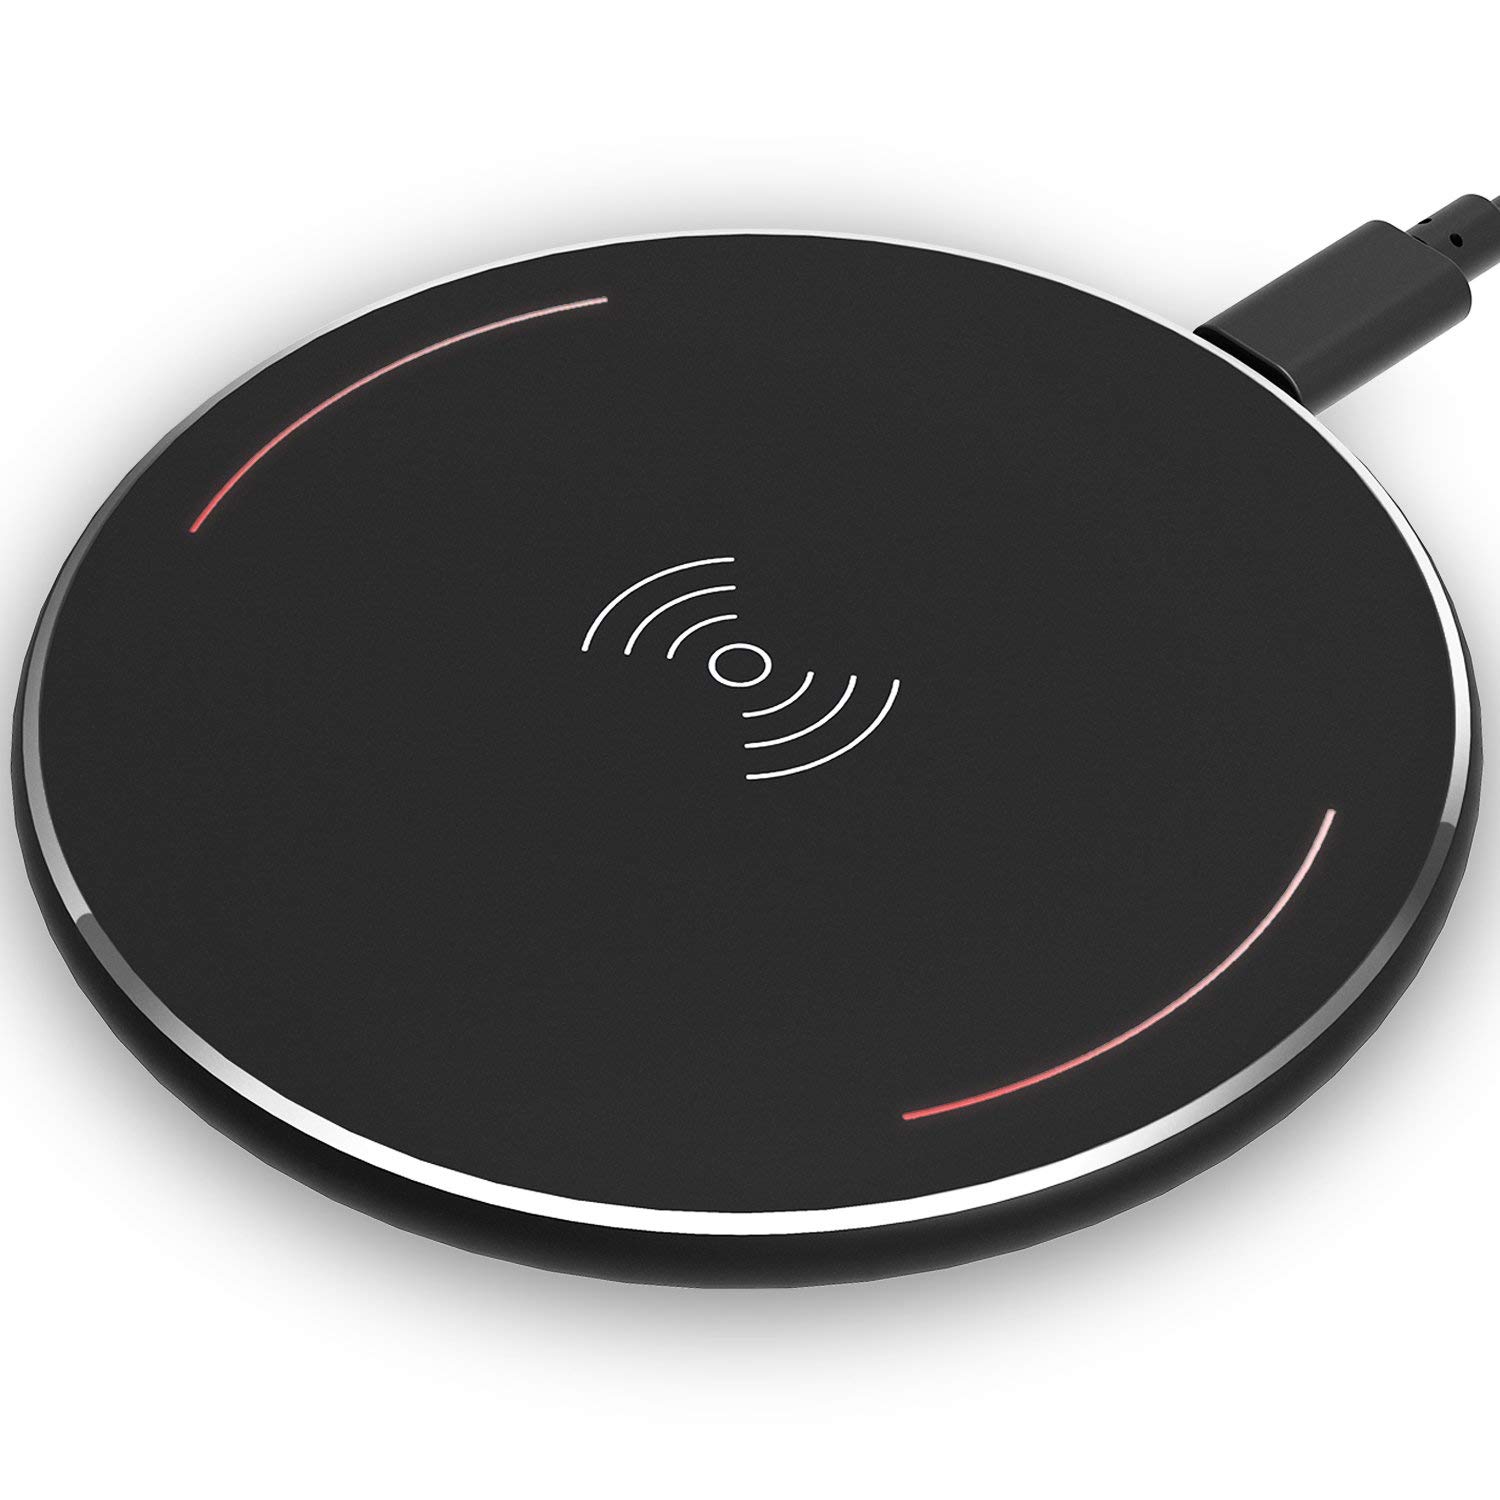 LUCKYKS Wireless Charging Pad works well.